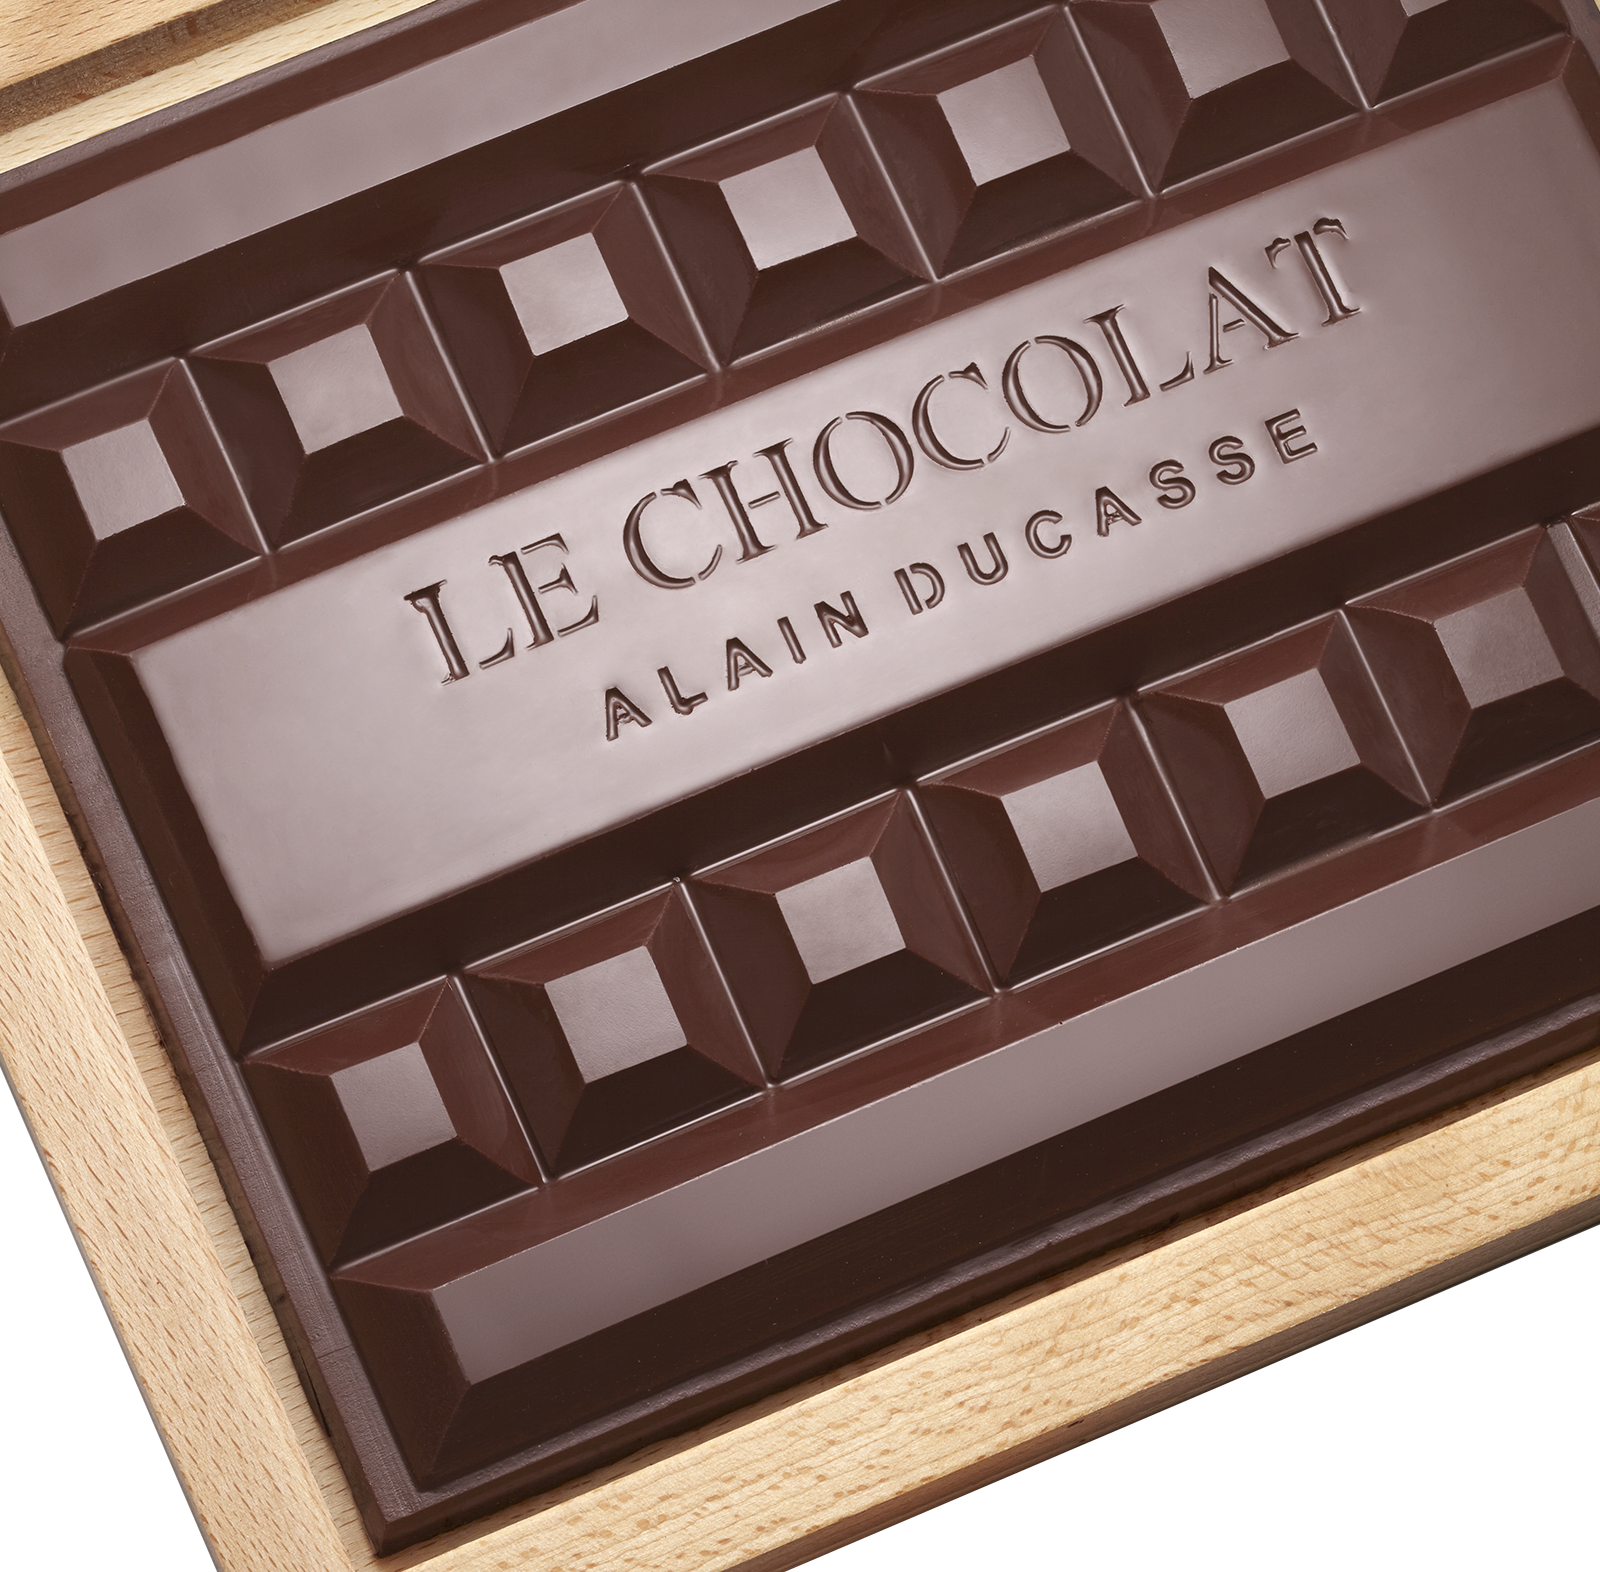 The chocolate block and accessories